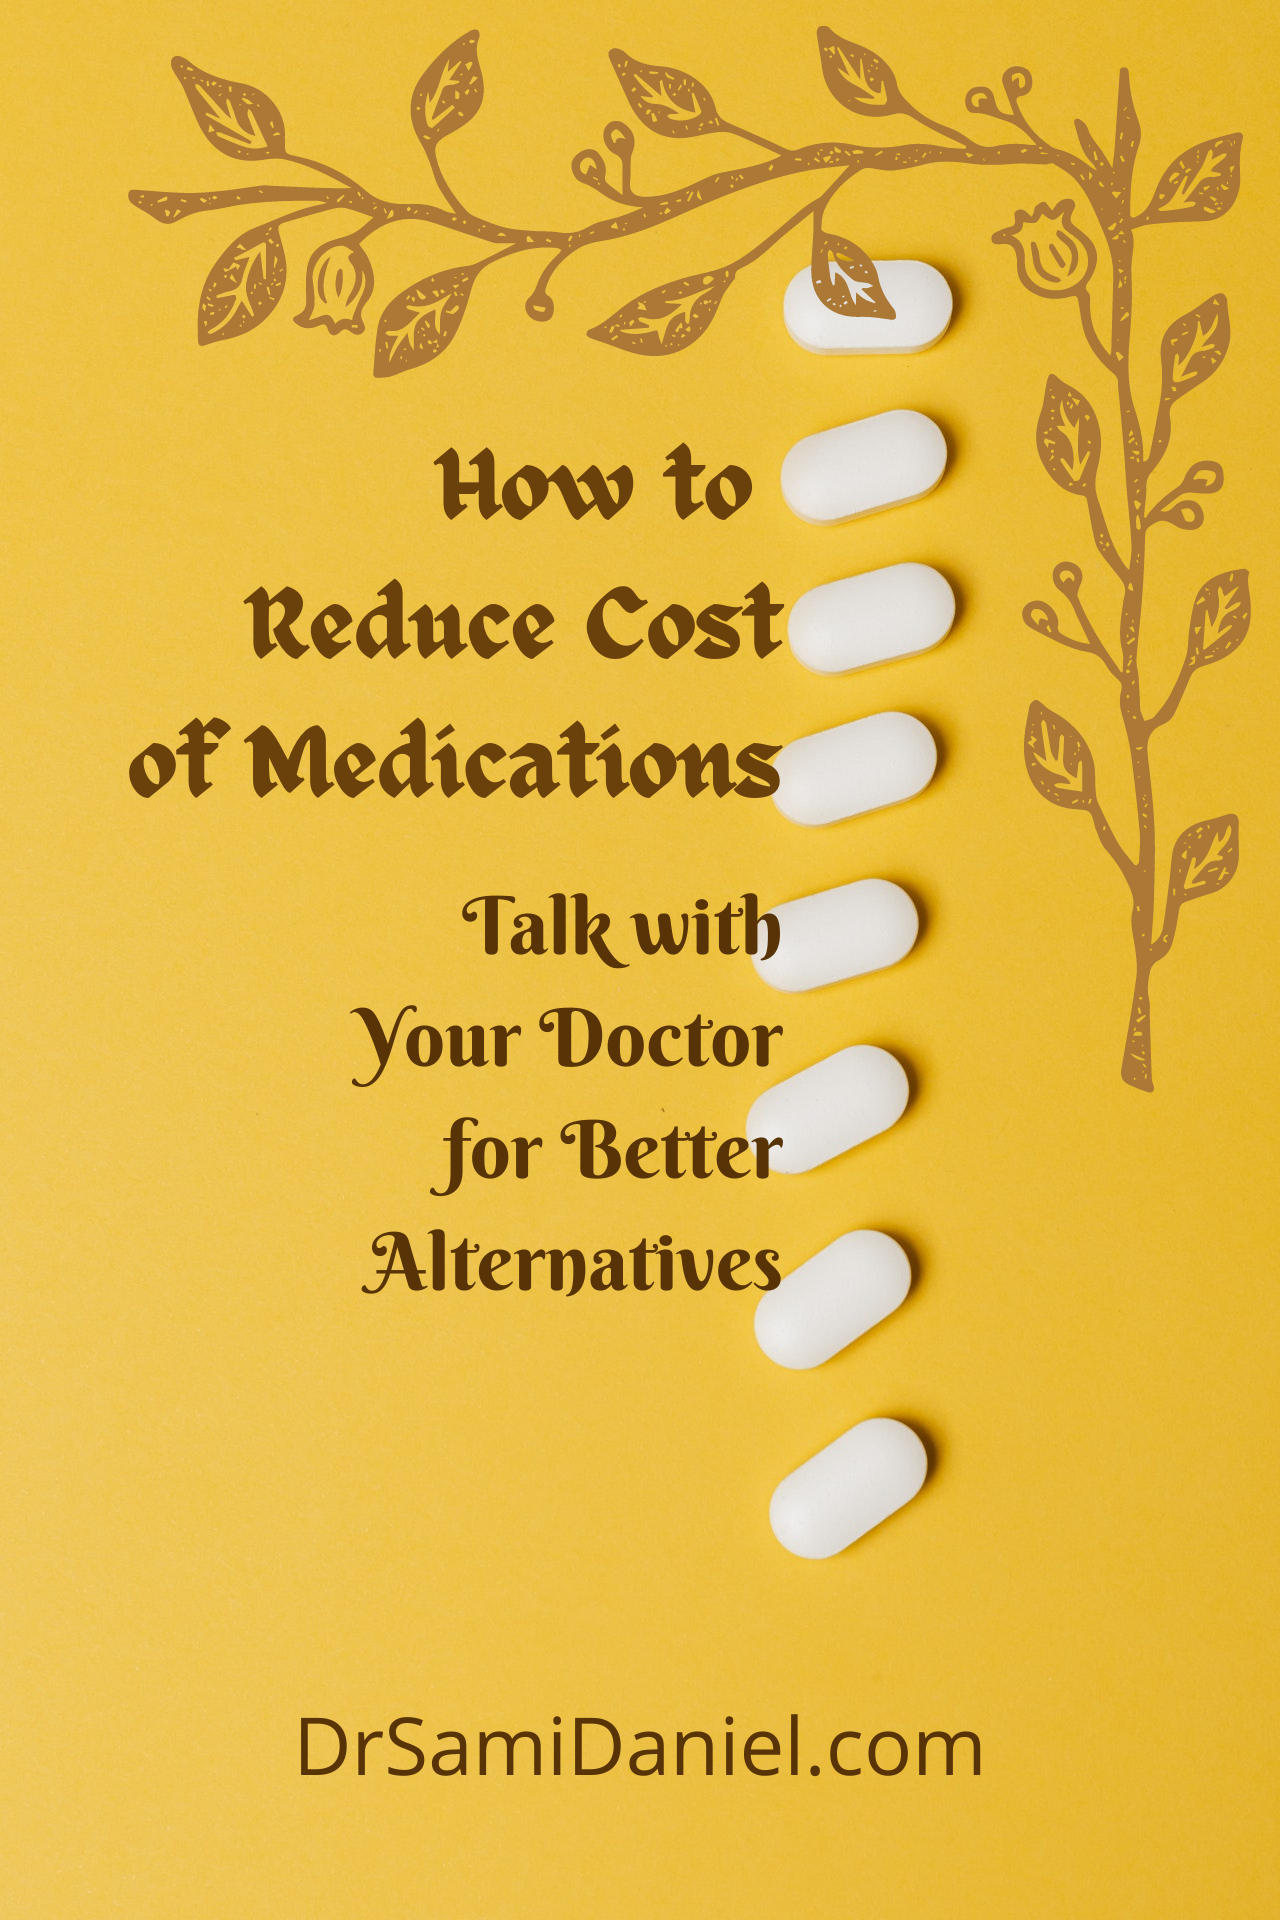 How to Reduce Cost of Medication